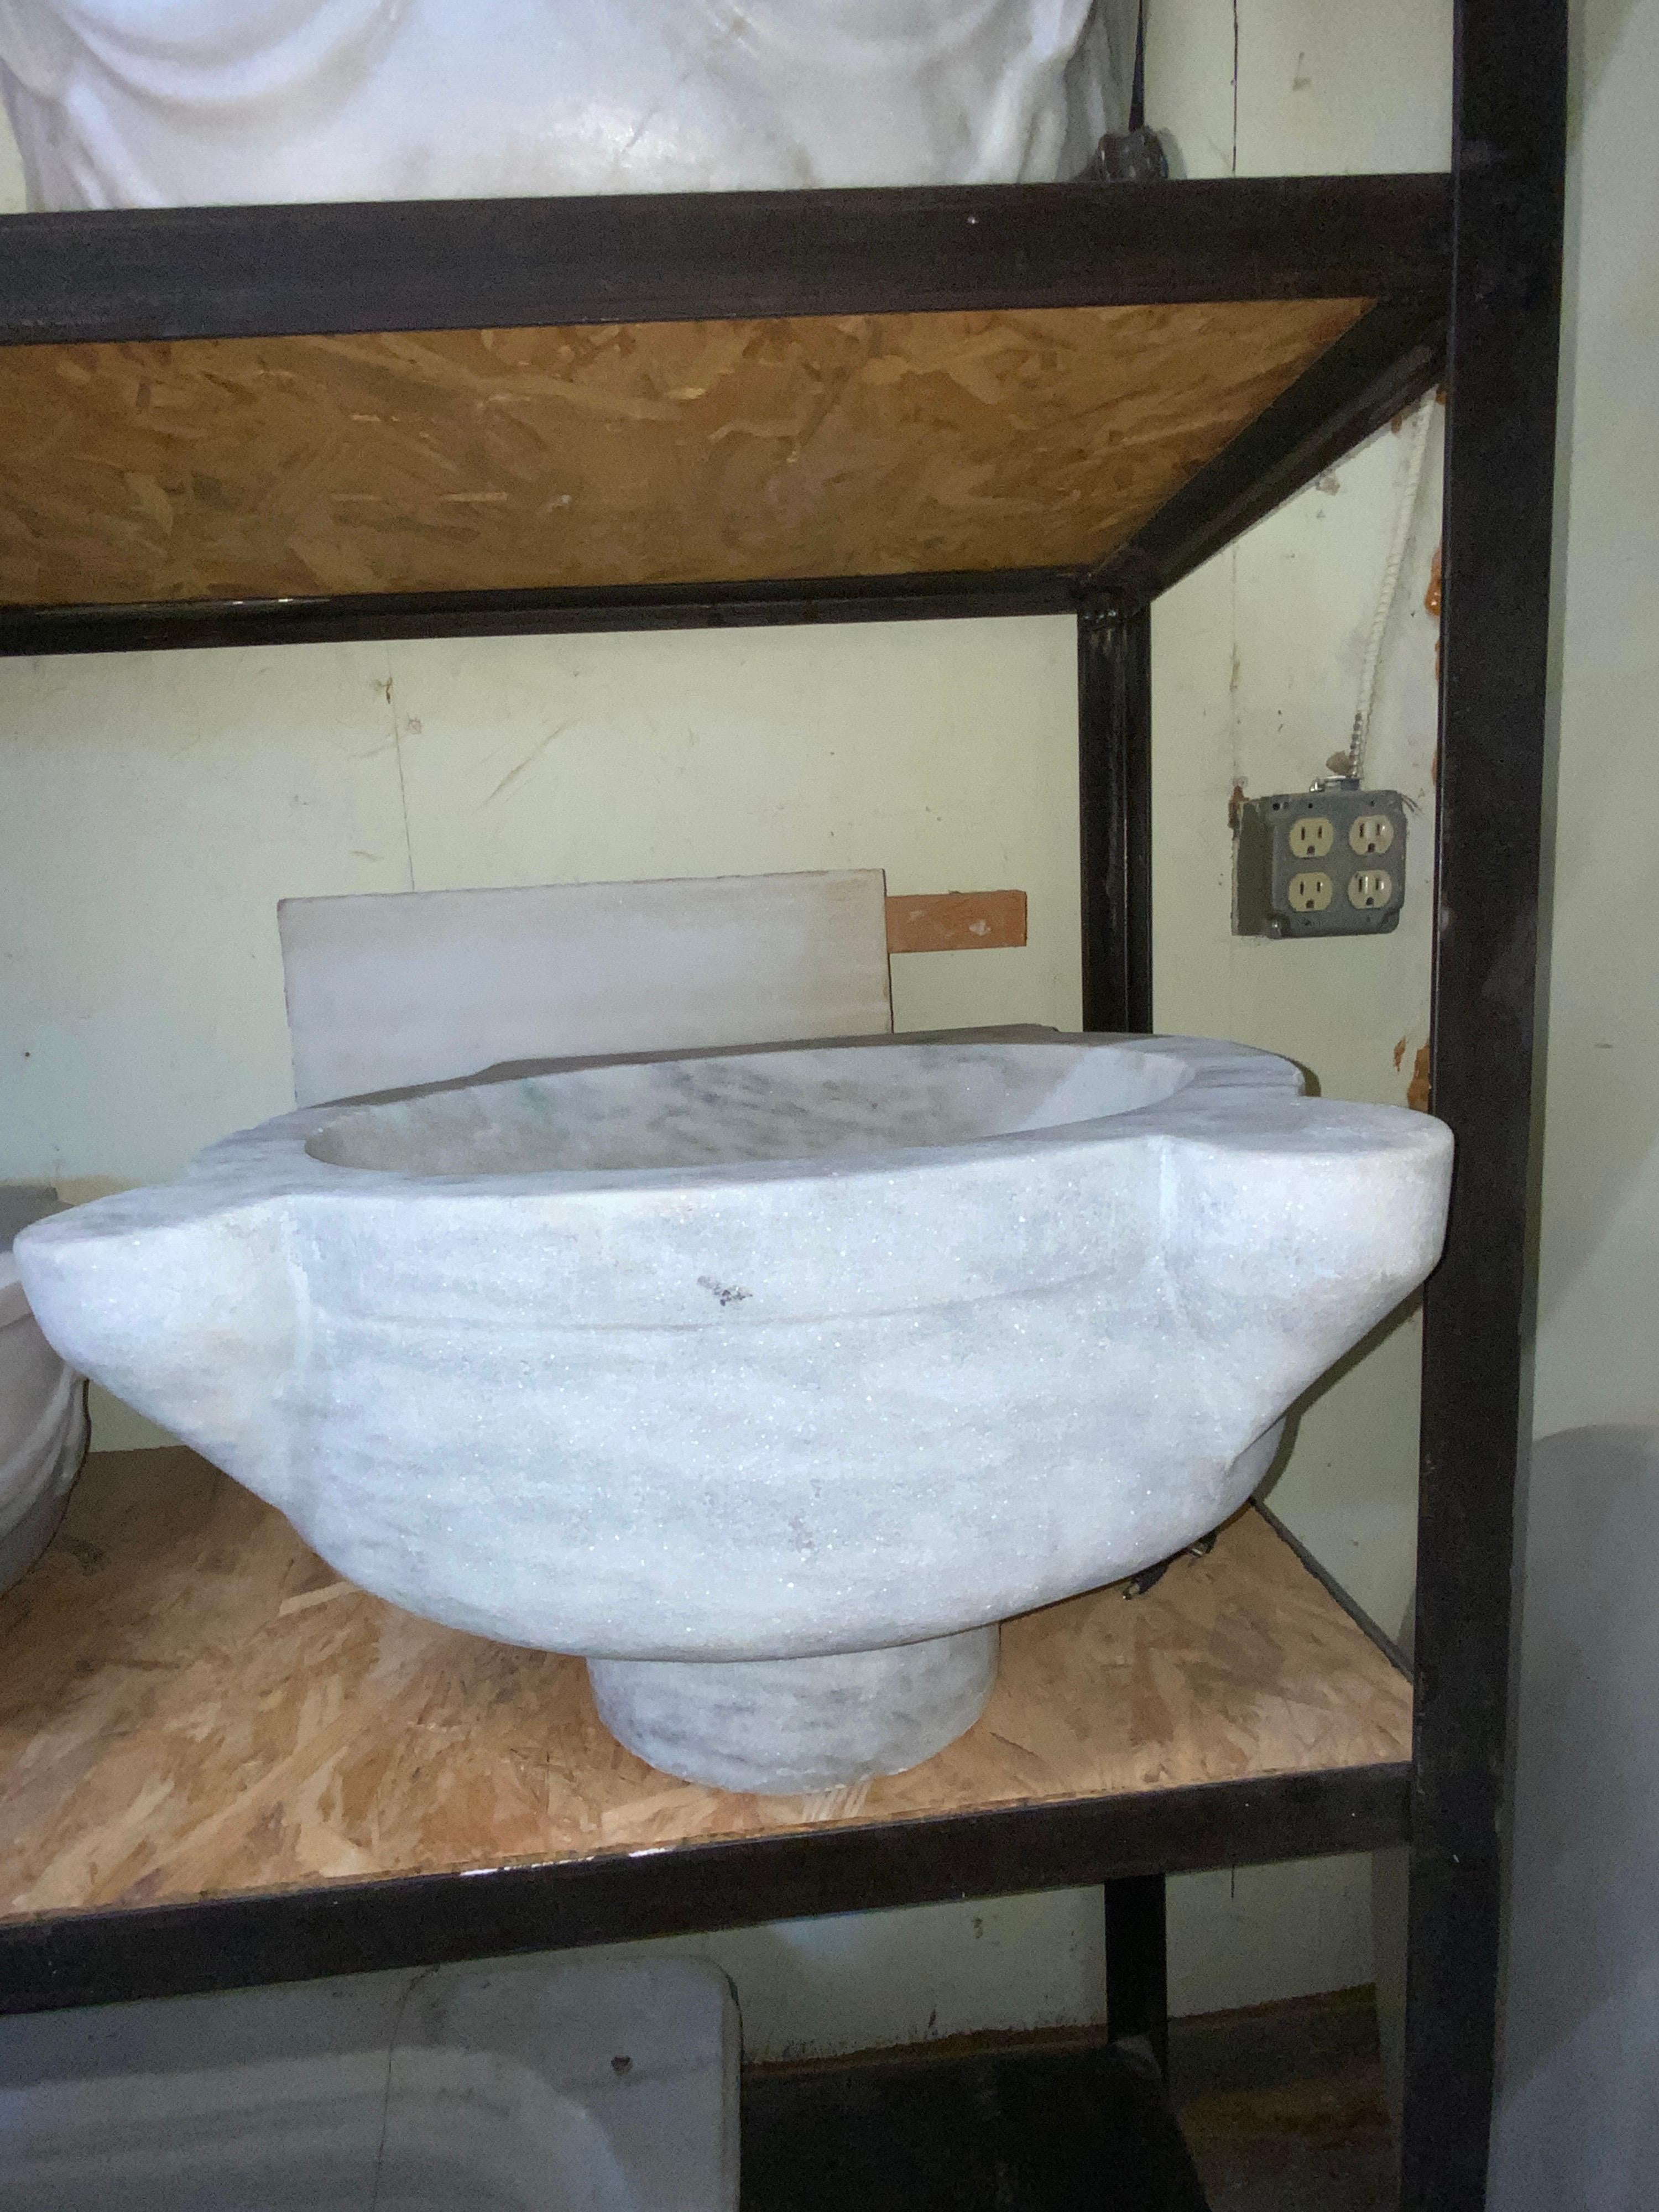 Gorgeous Marble Sink featuring gray veining. This item dates back to the 1850s. Origin; Greece.